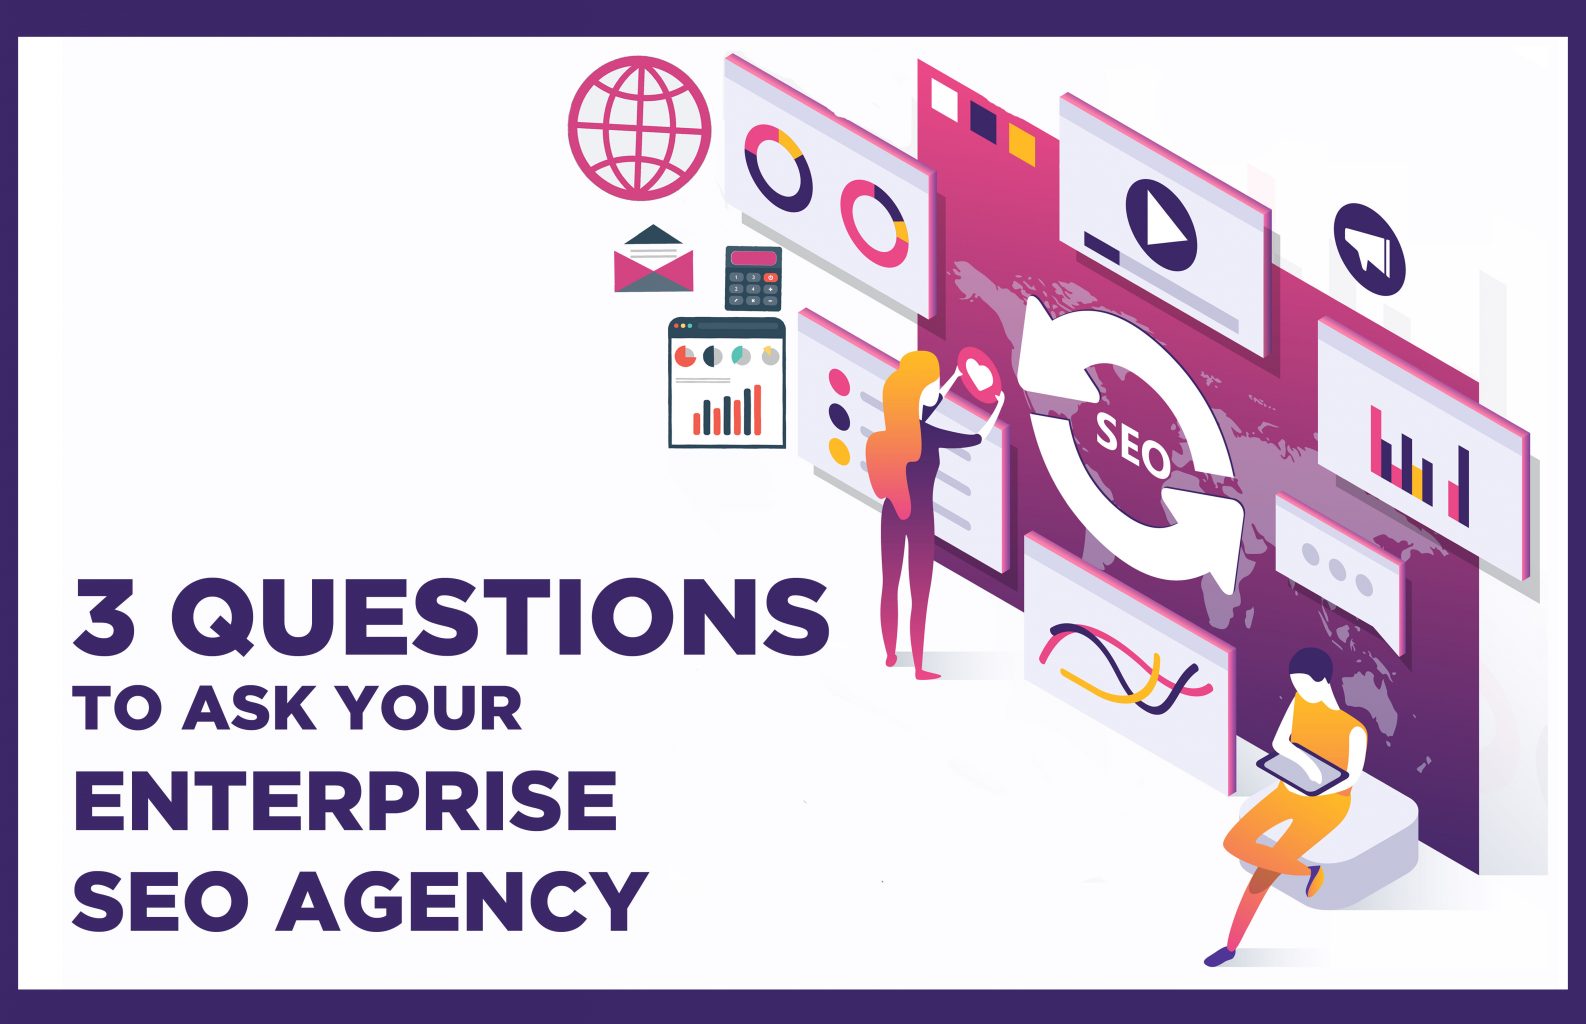 3 questions to ask your enterprise seo agency before hiring them - iQuanti digital marketing agency